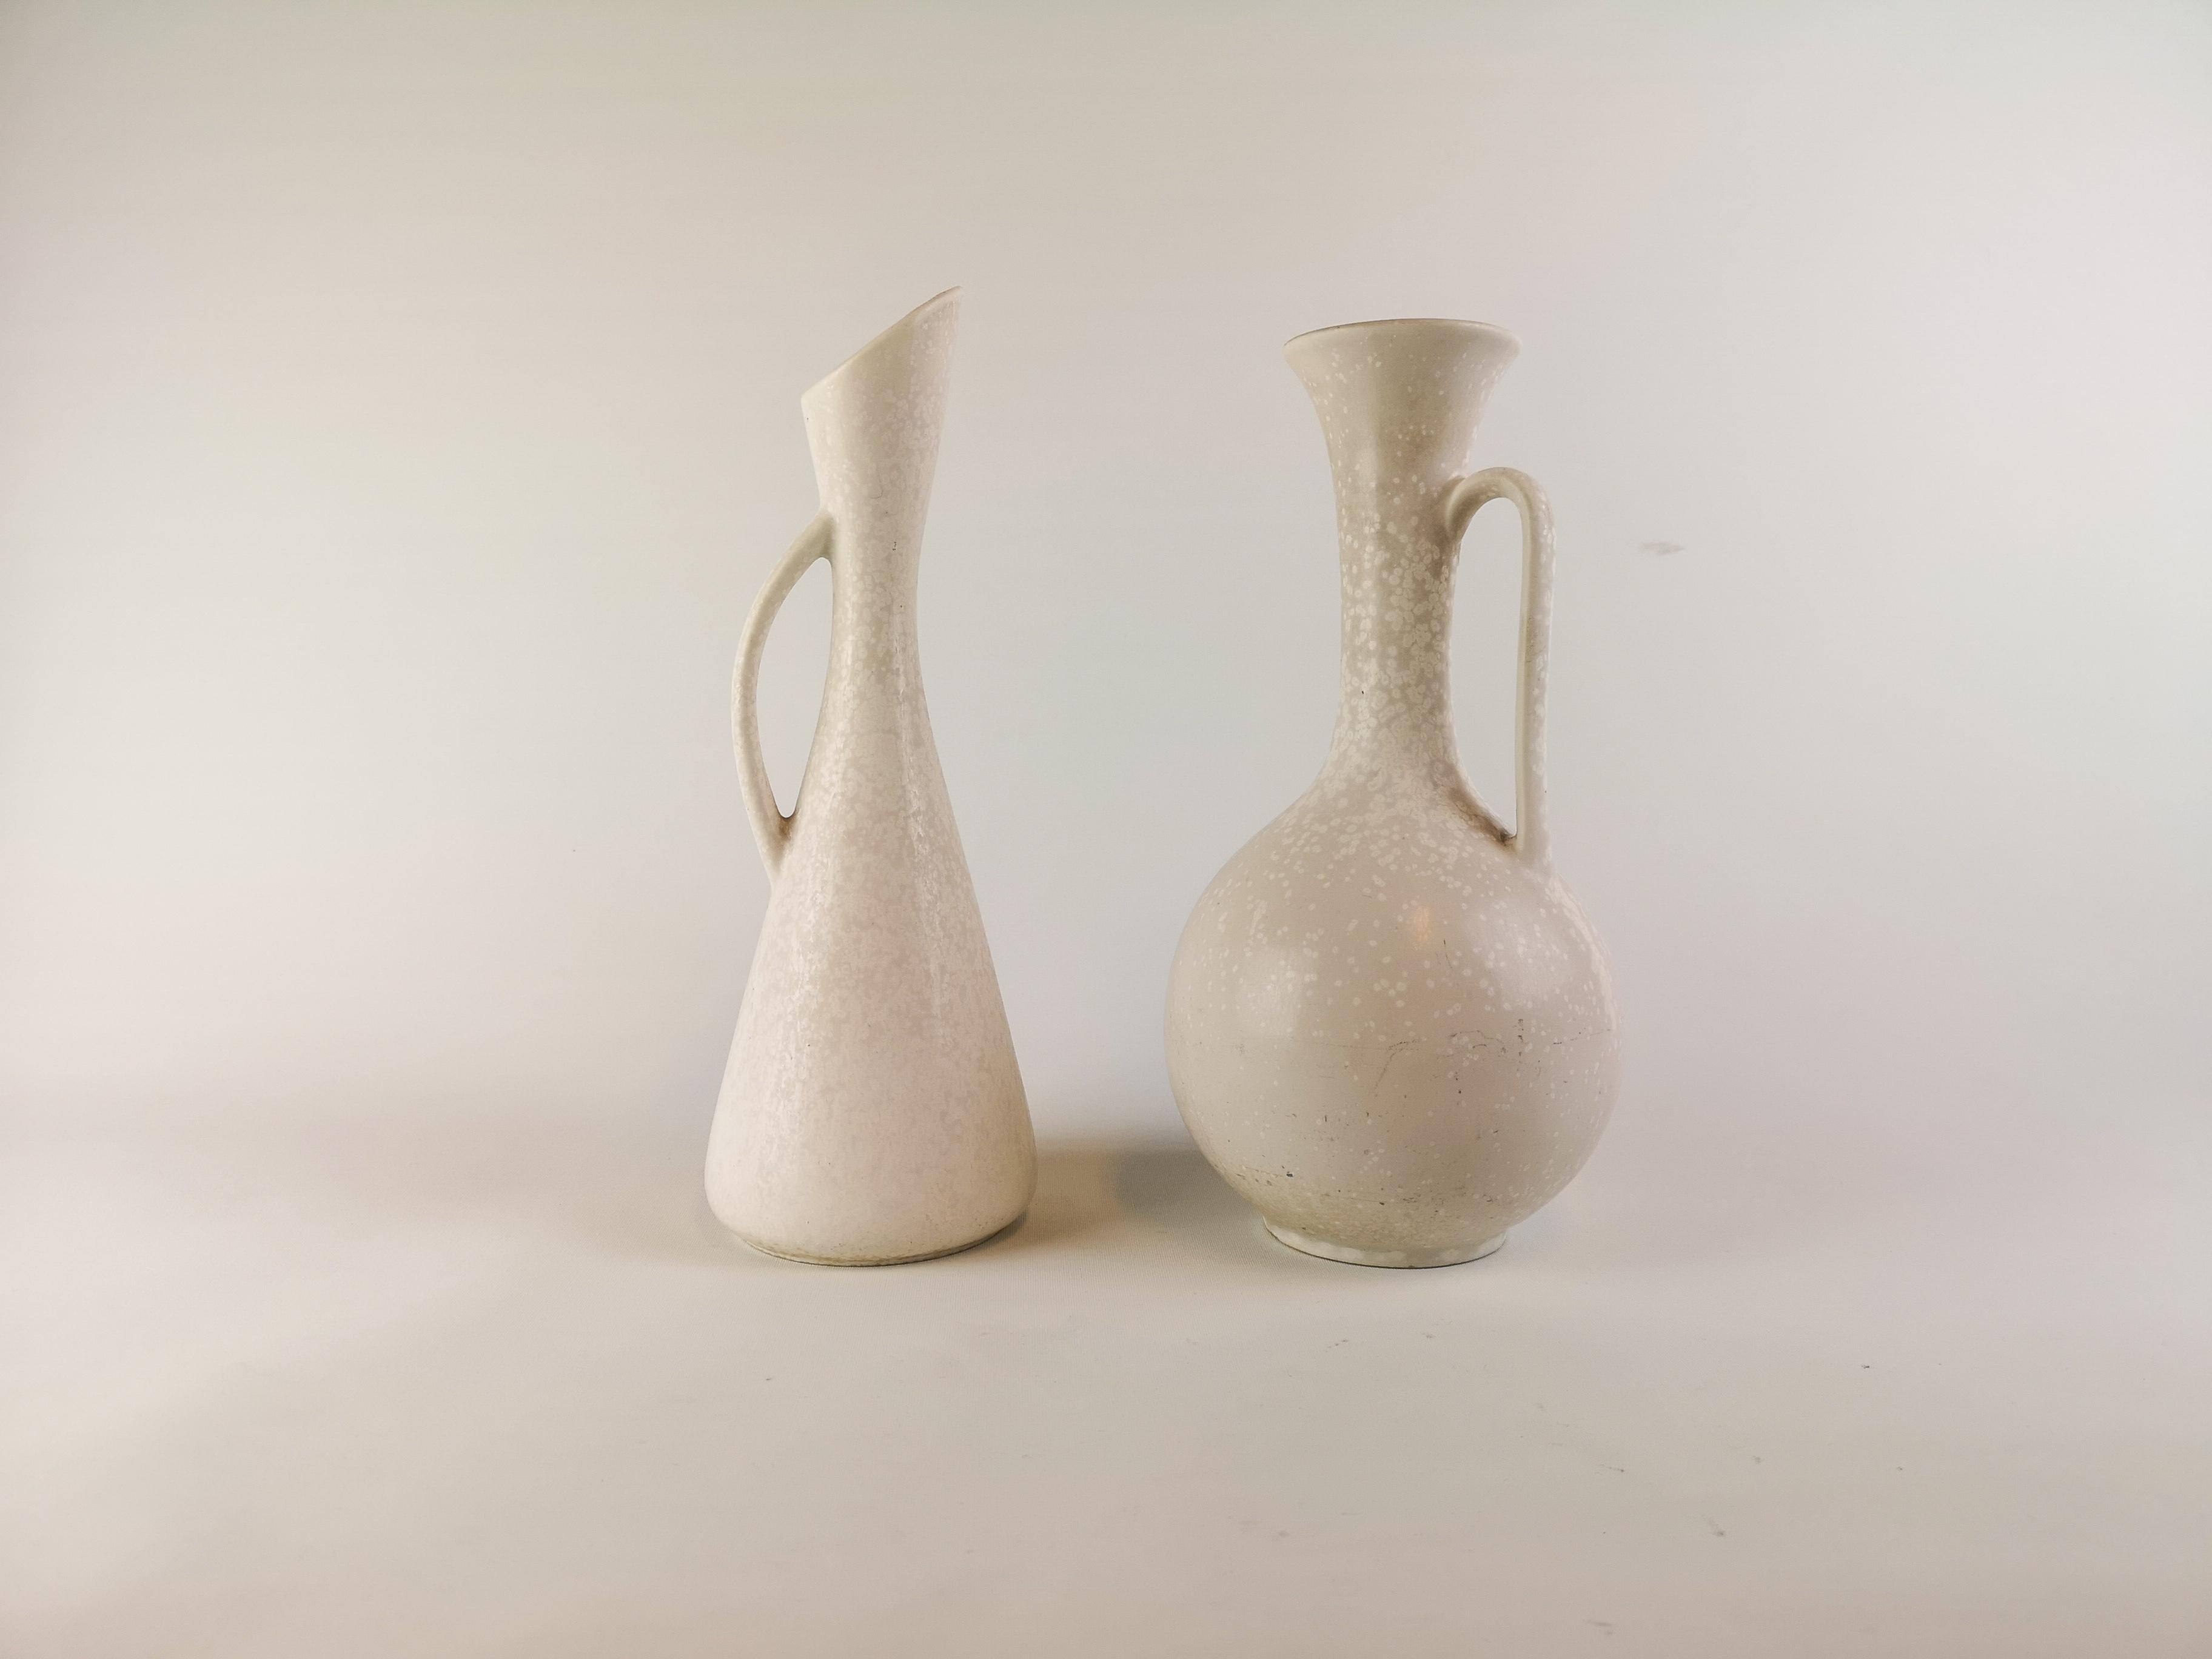 Two wonderful large vases made in Sweden during the 1950s at Rörstrand factory and designed by Gunnar Nylund.

The vase matches each other with the glaze that goes in white and grey. 

Good condition.

Measures: Vase H 30 x D 11 and H 29 x D